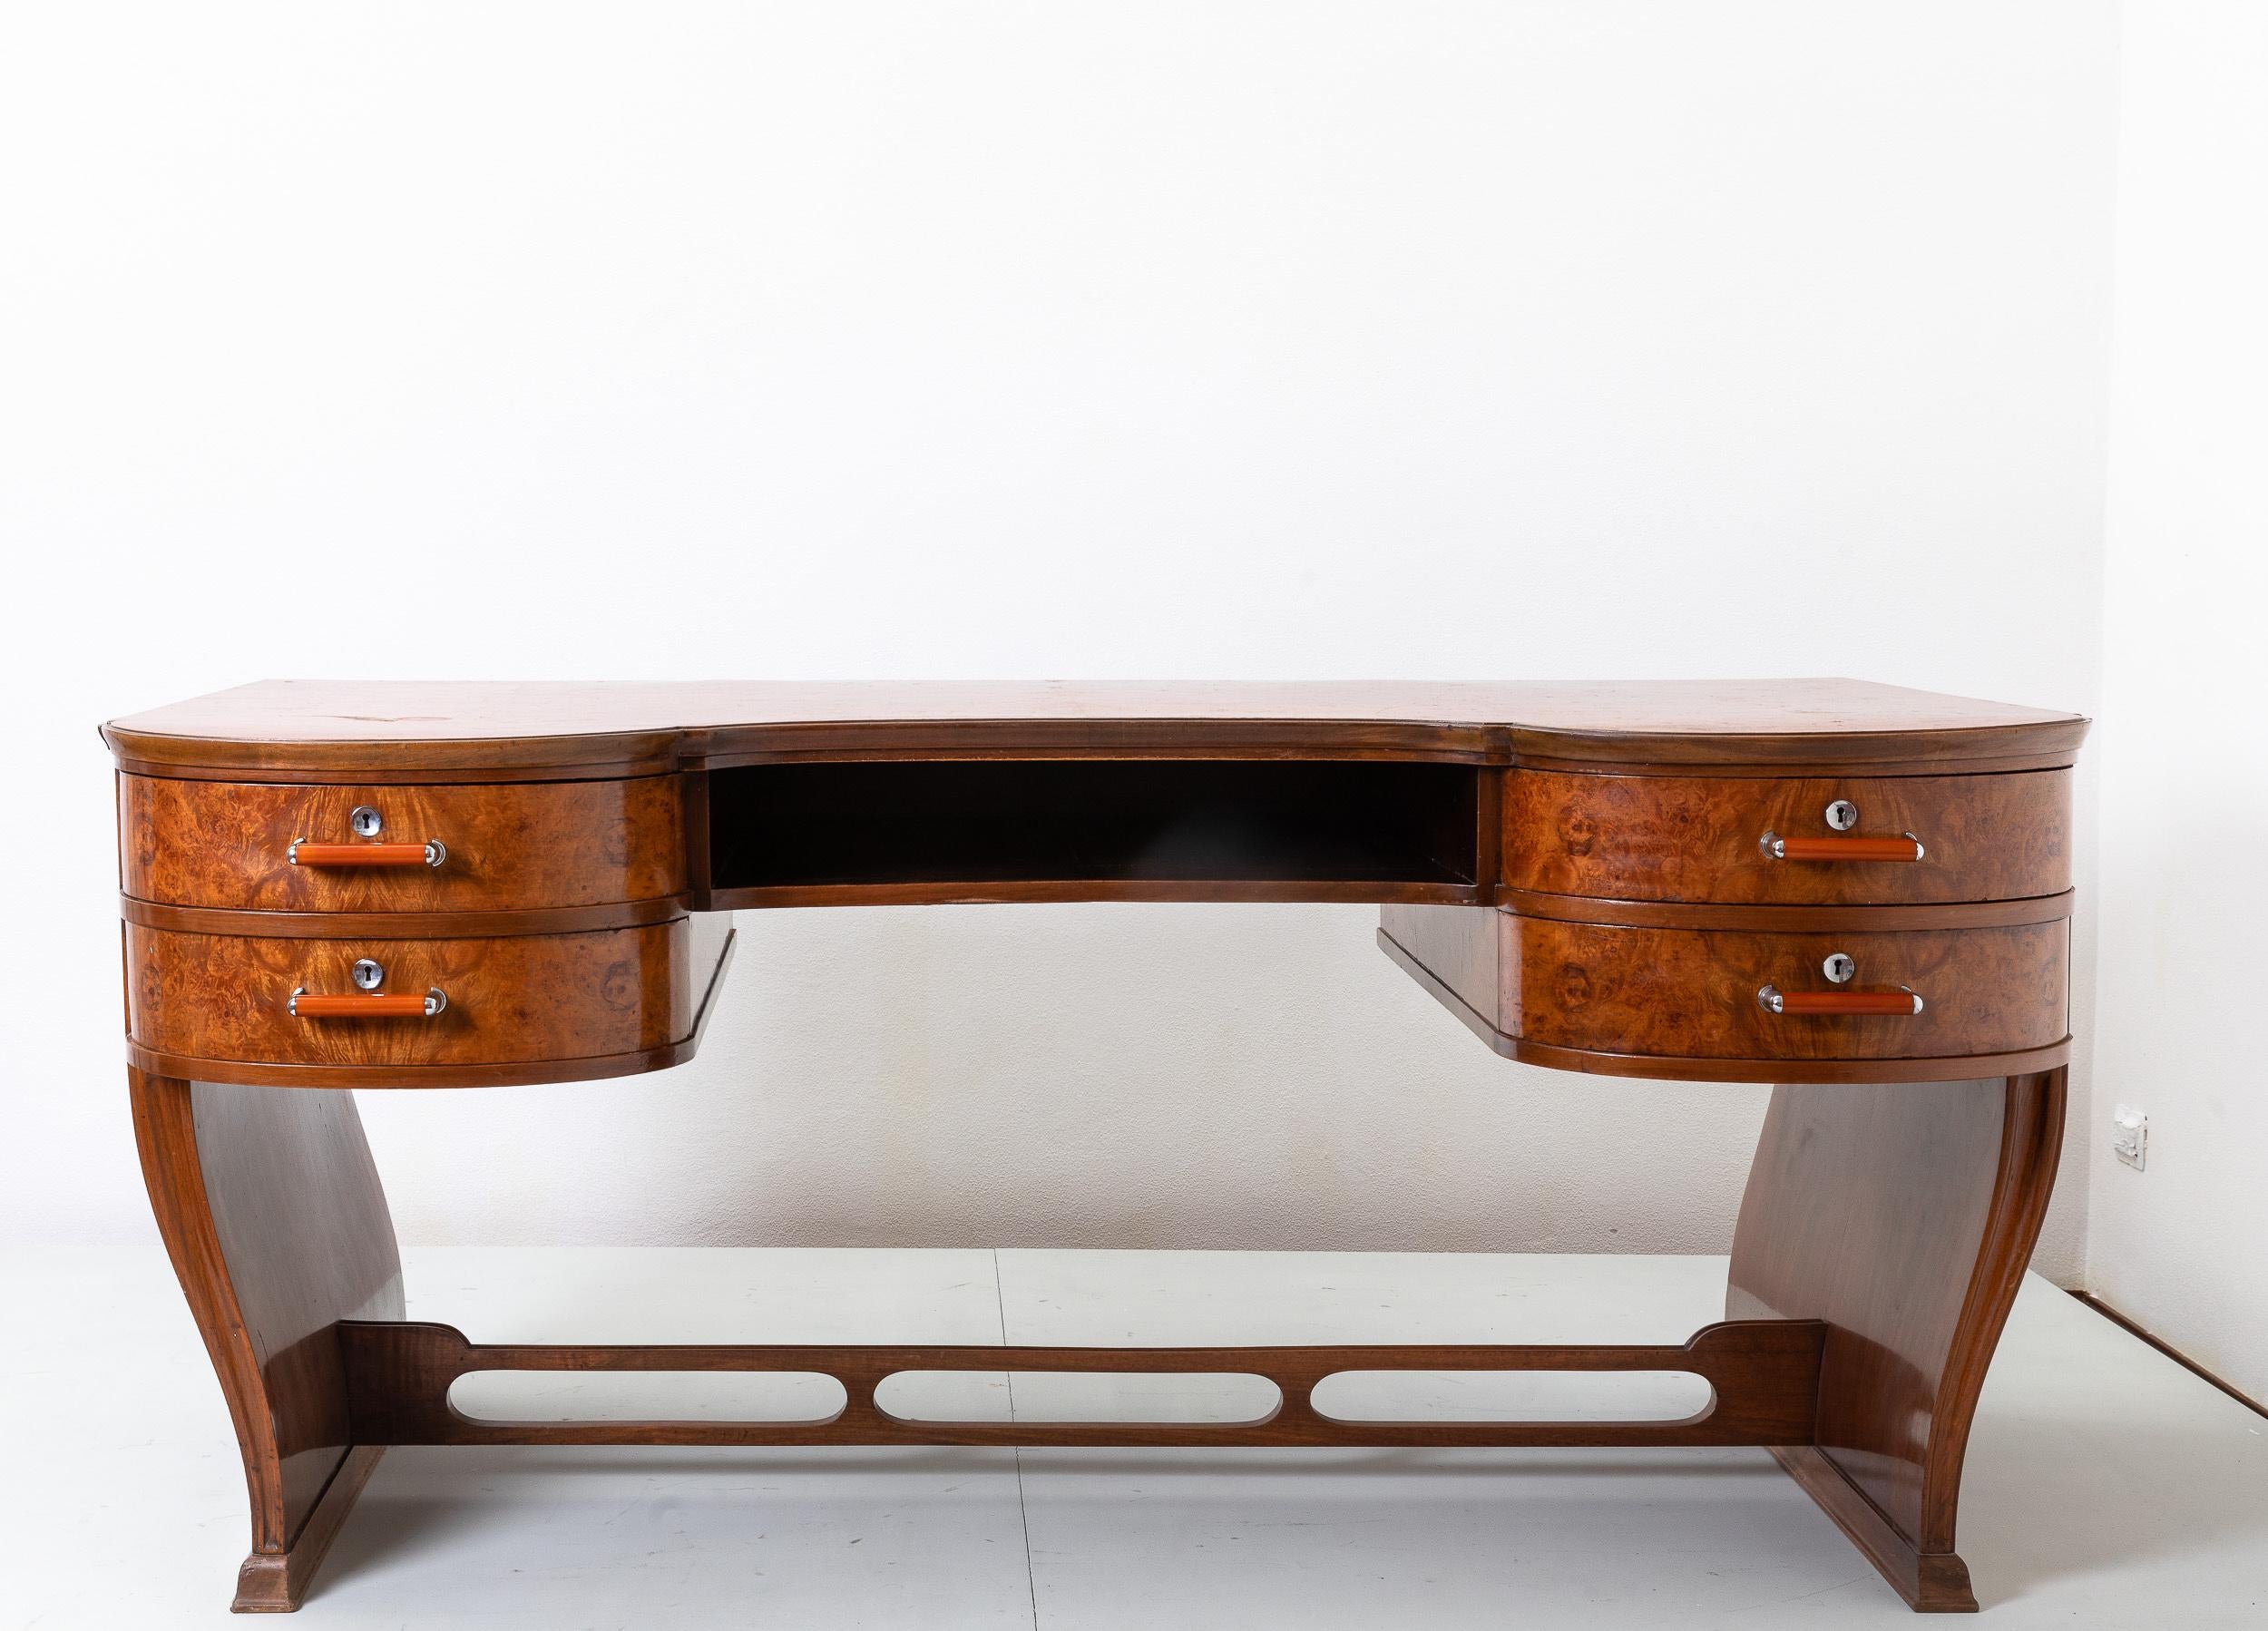 Prod. Italy, c. 1930 Deco desk with curvilinear forms  For Sale 2